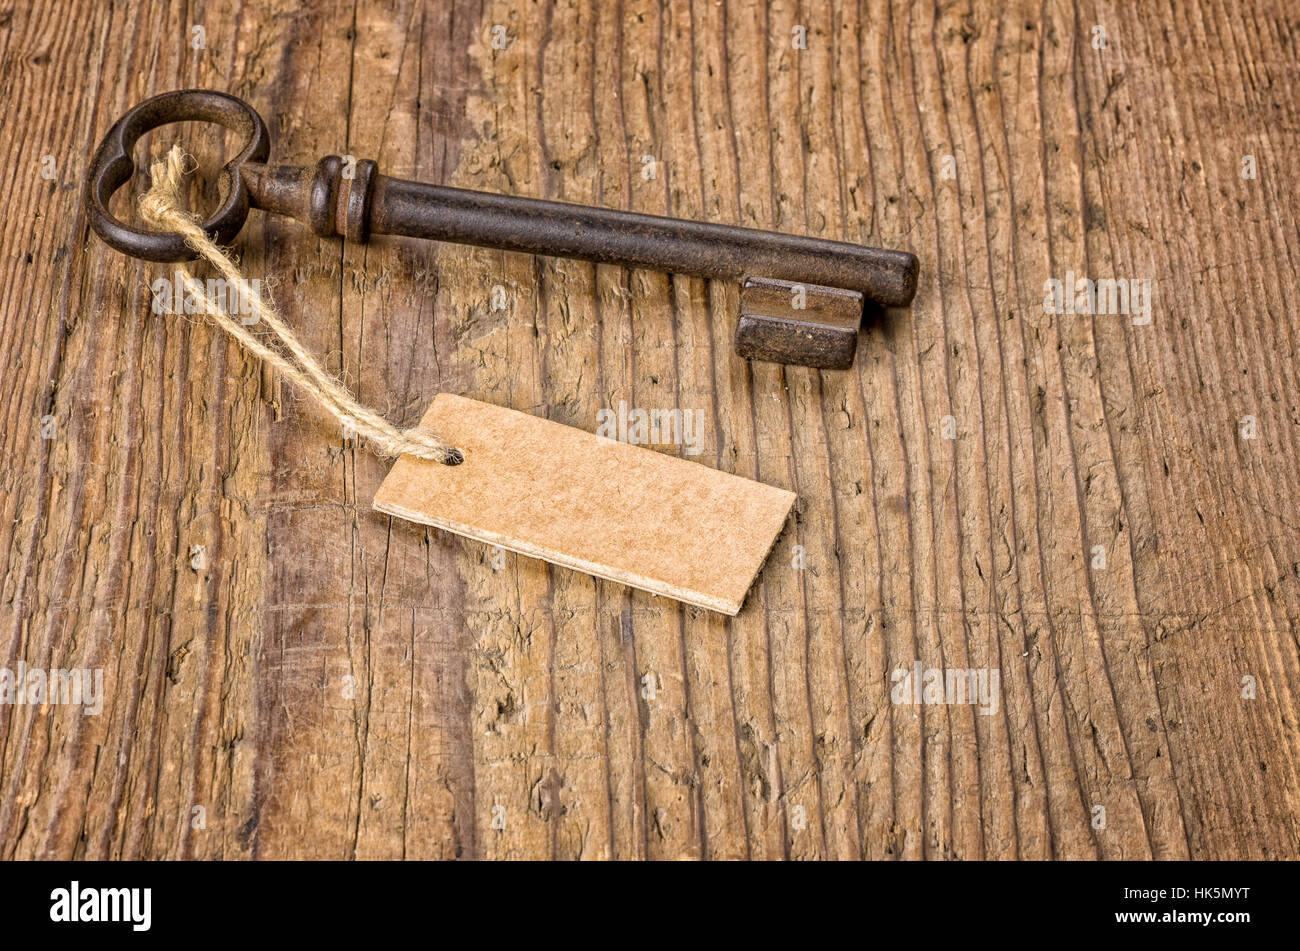 wood, antique, supporter, fan, shield, key, old, note, memo, macro, close-up, Stock Photo